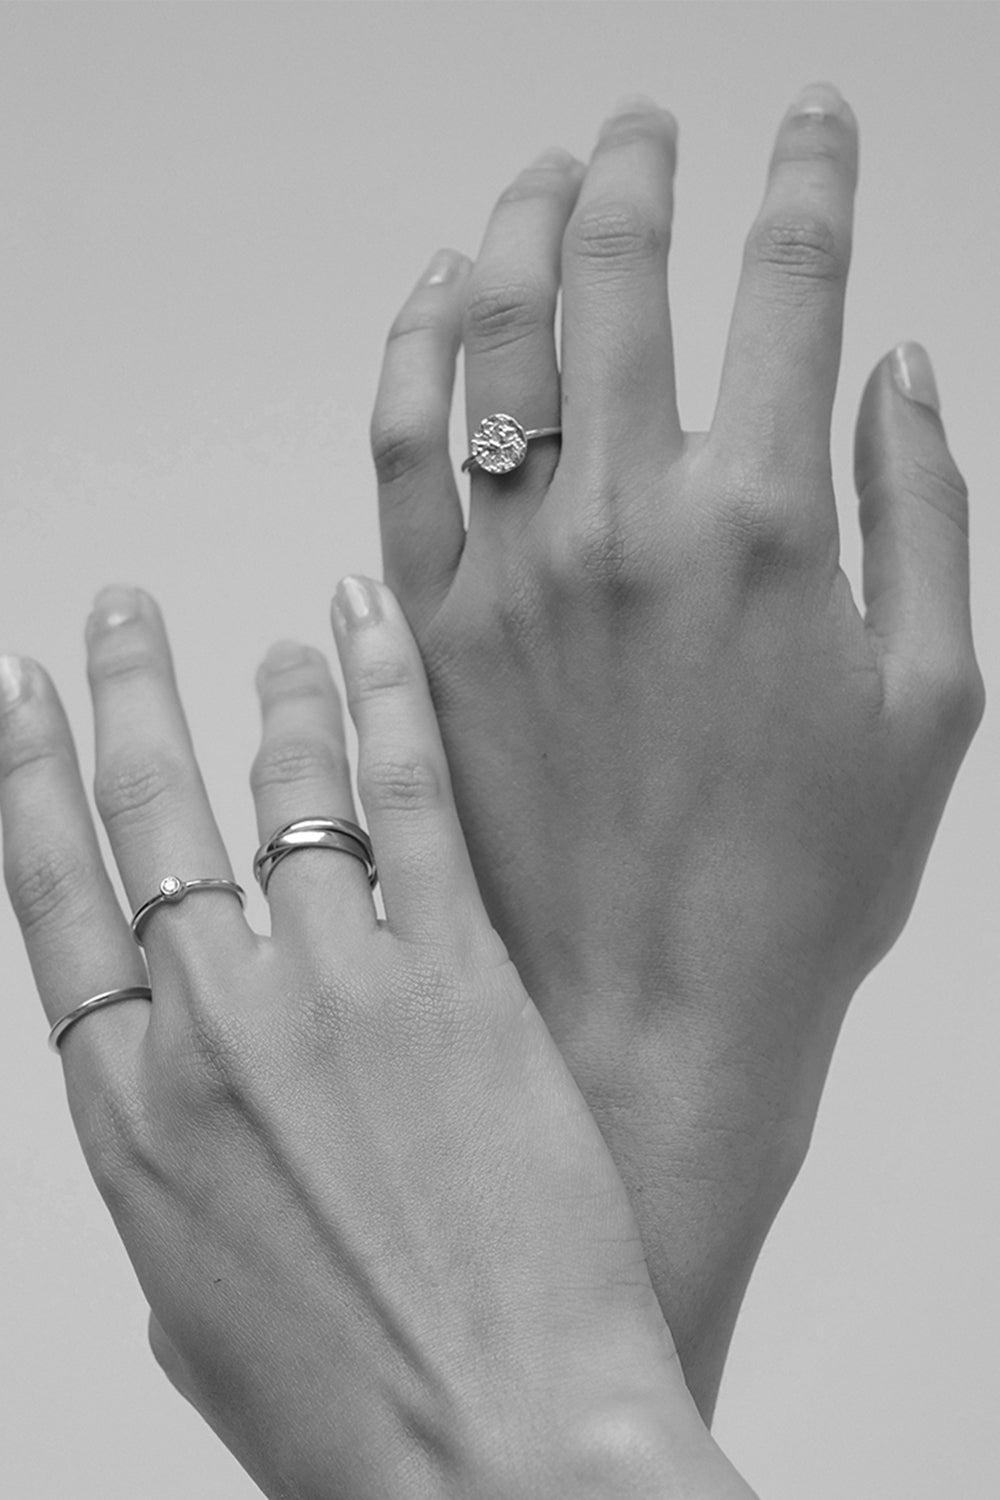 Mini Coin Ring | Silver or 9K White Gold, More Options Available| Natasha Schweitzer